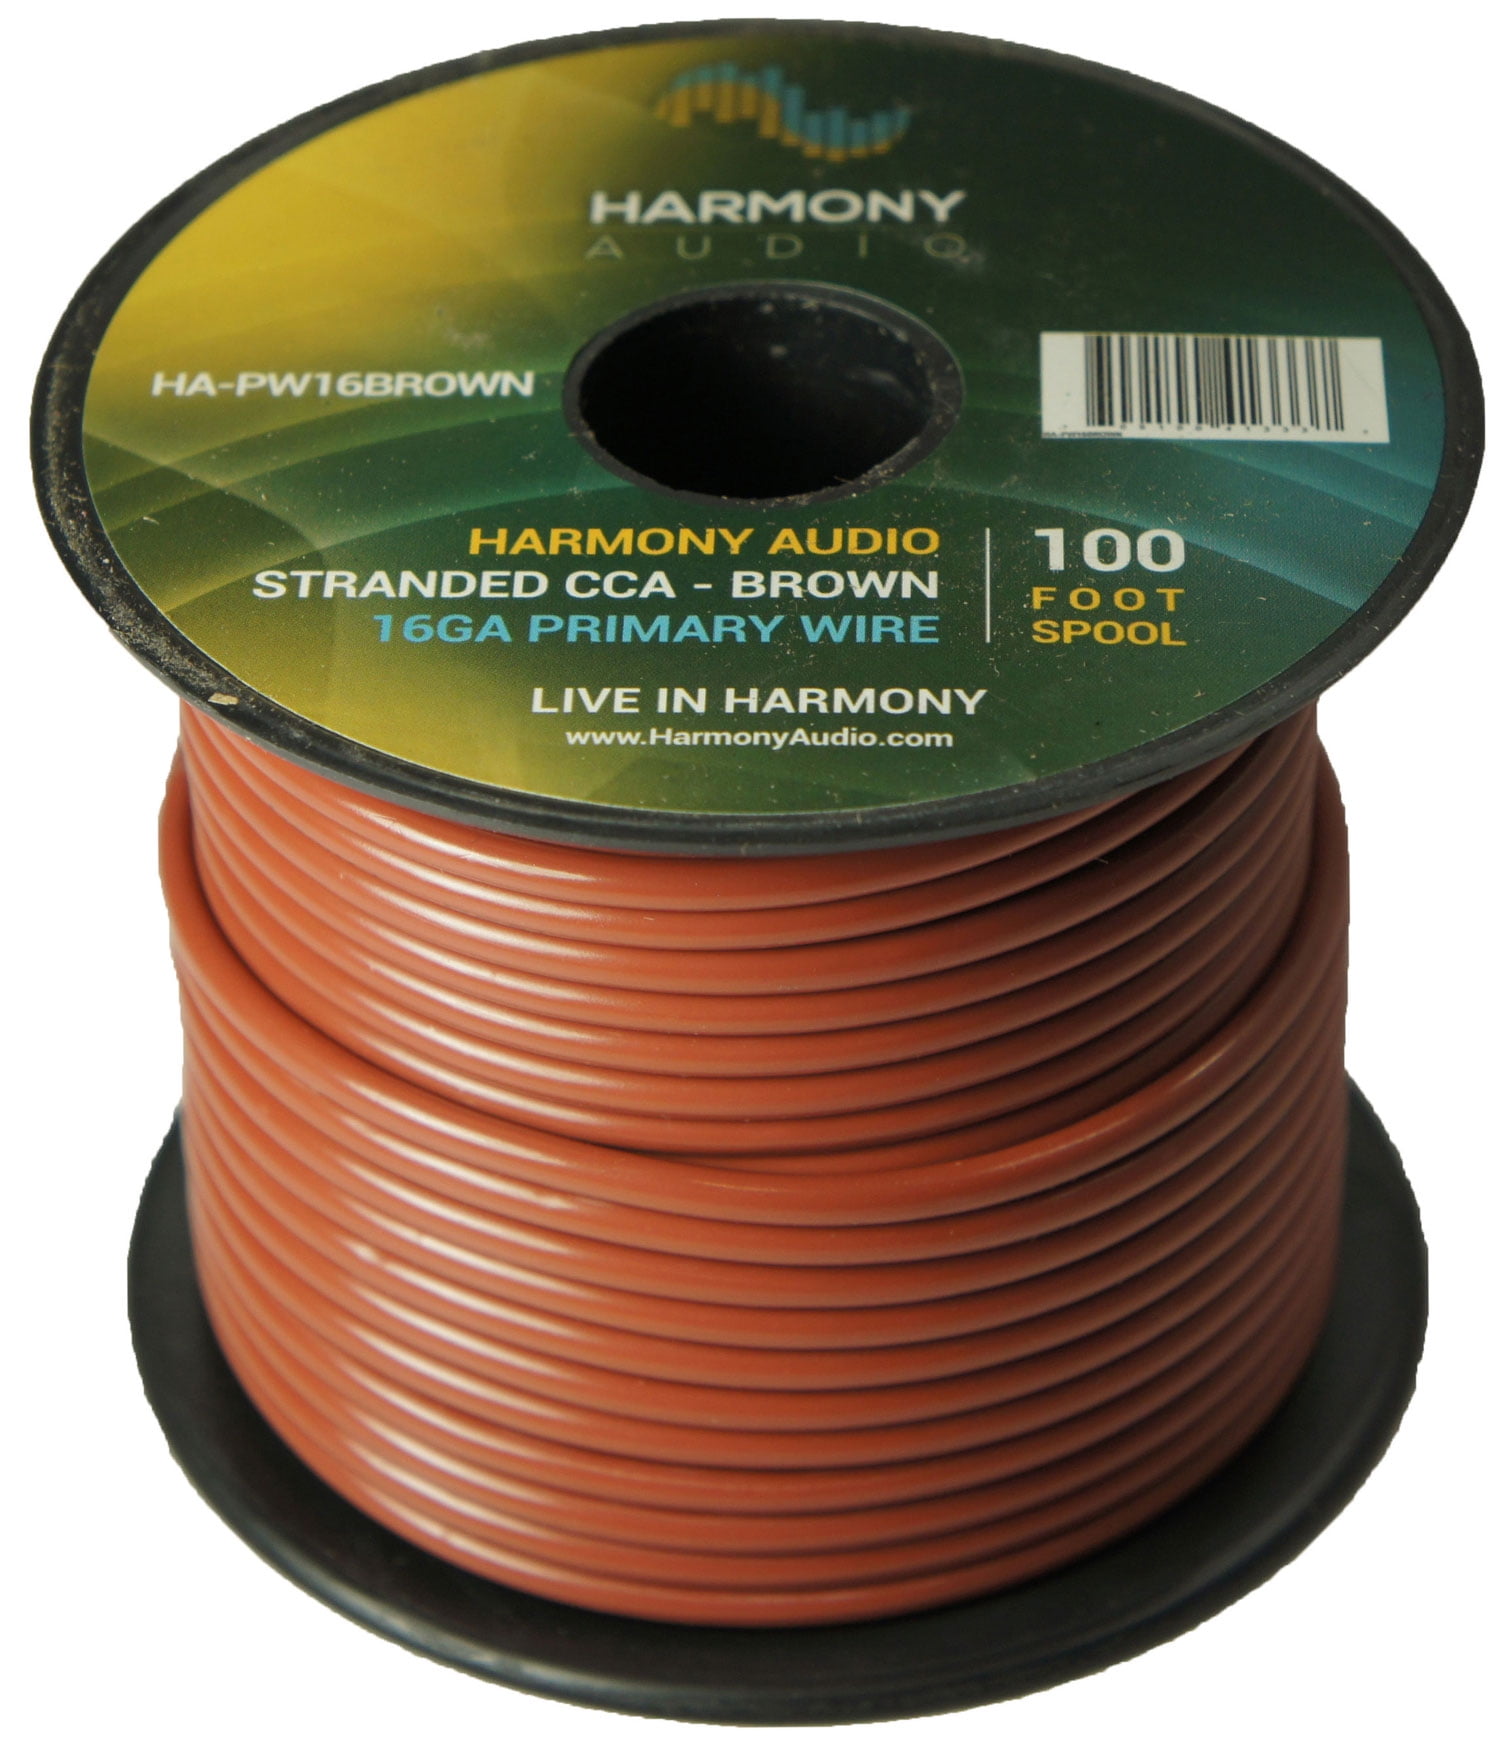 14 GAUGE WIRE ASSORTED 100 FT EA PRIMARY 600 FT AWG STRANDED COPPER POWER REMOTE